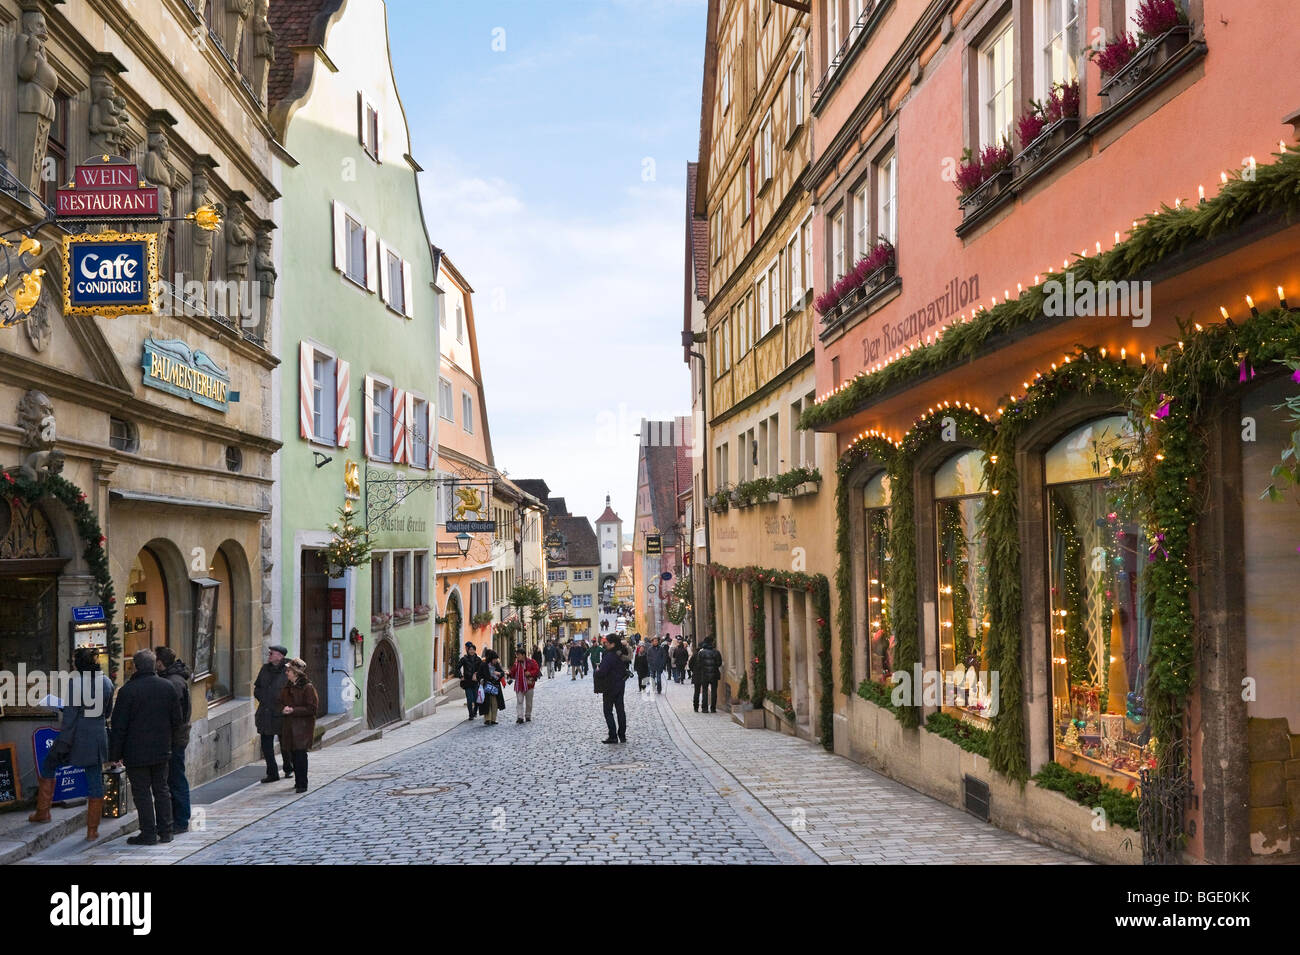 Shops on Schmiedgasse (one of the city's main streets), Rothenburg ob der Tauber, Bavaria, Germany Stock Photo